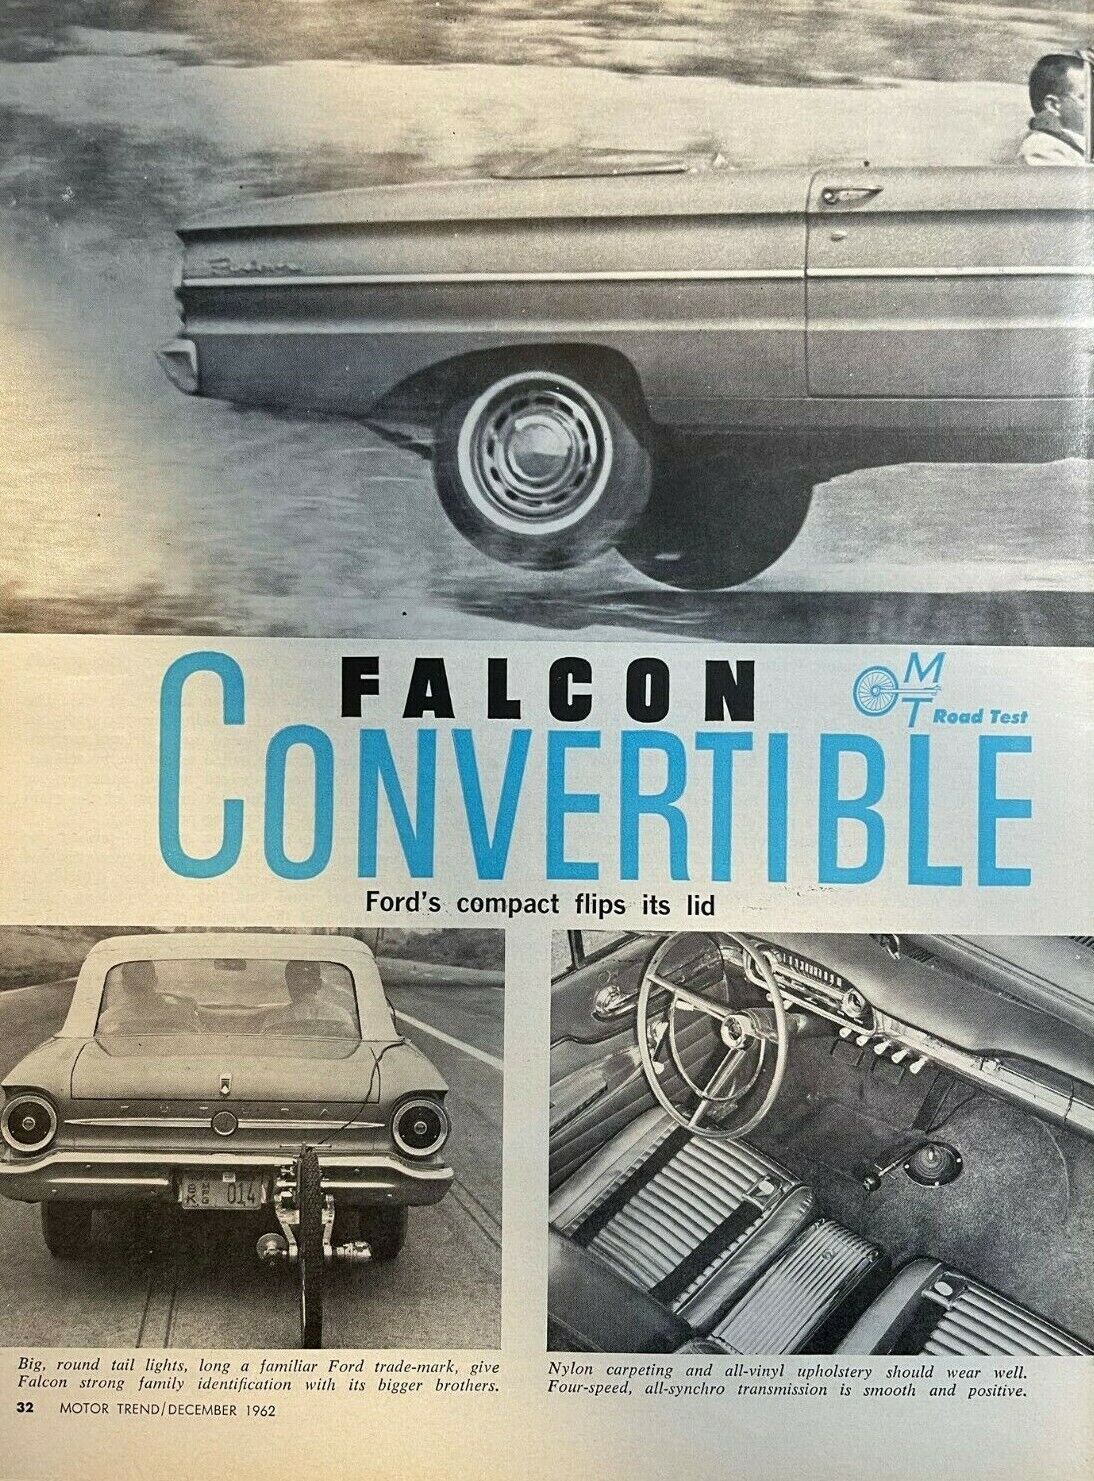 1962 Road Test Ford Falcon Convertible illustrated